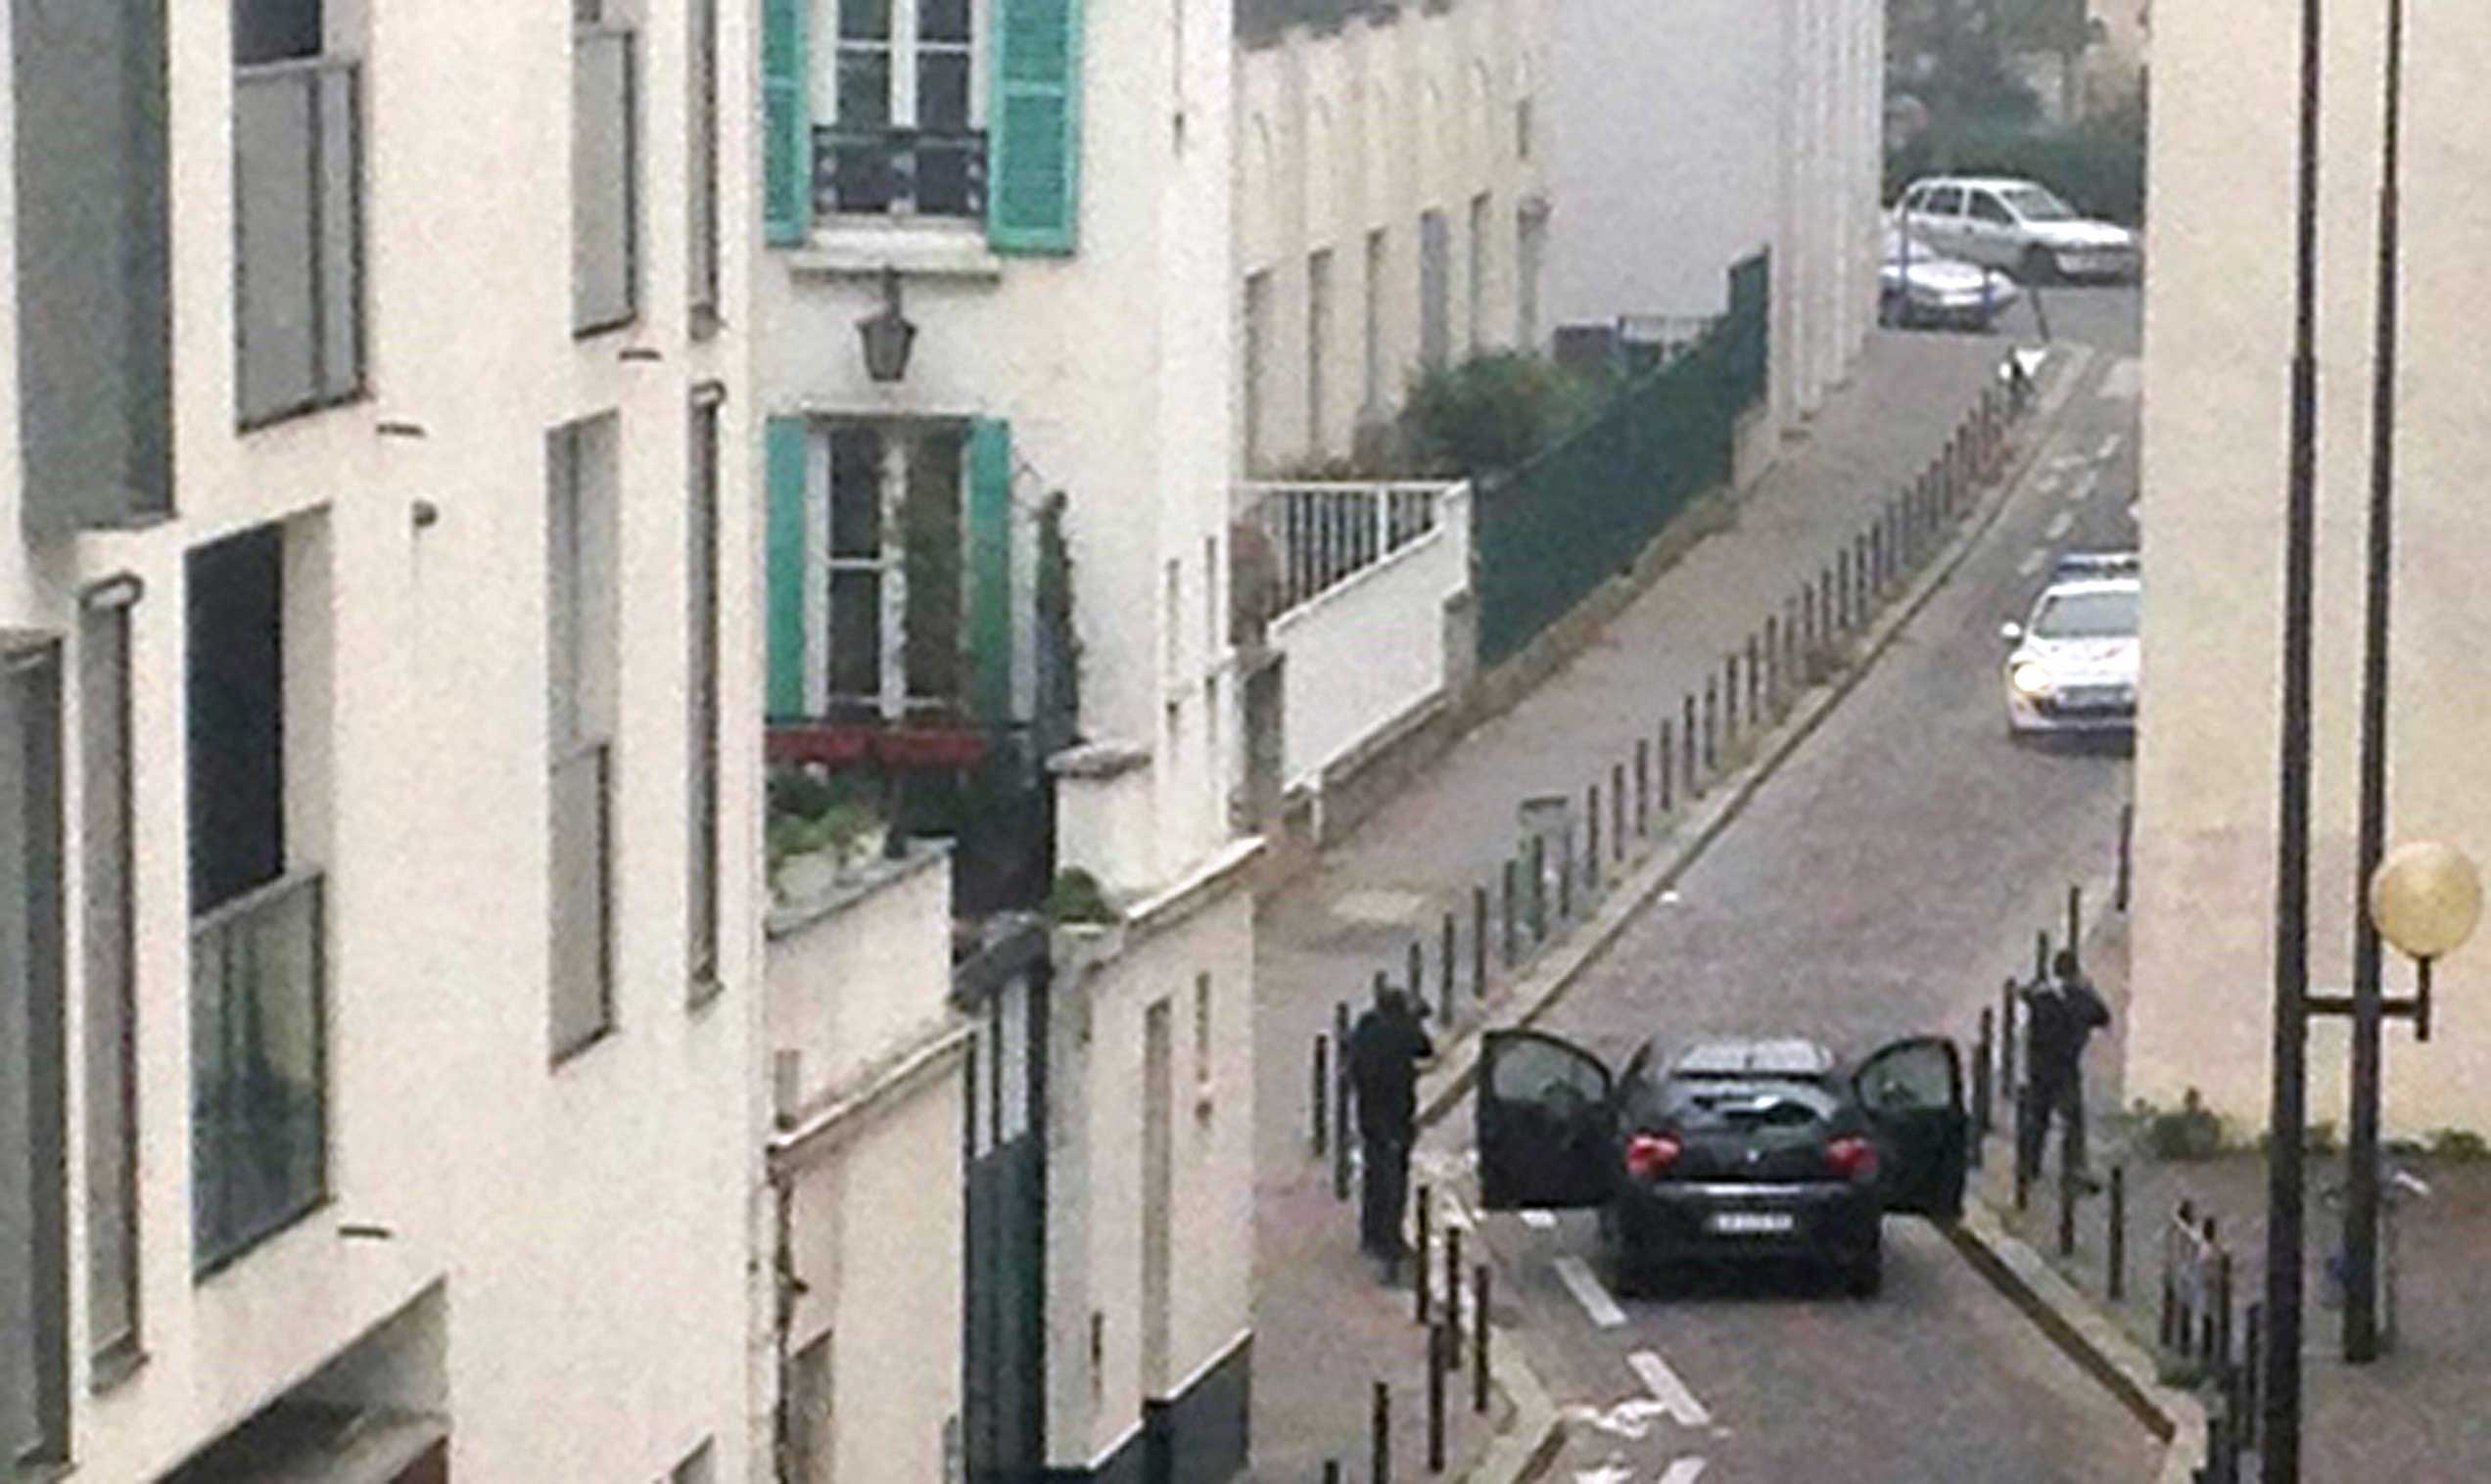 Armed gunmen face police officers near the offices of the French satirical newspaper Charlie Hebdo in Paris on Jan. 7, 2015.